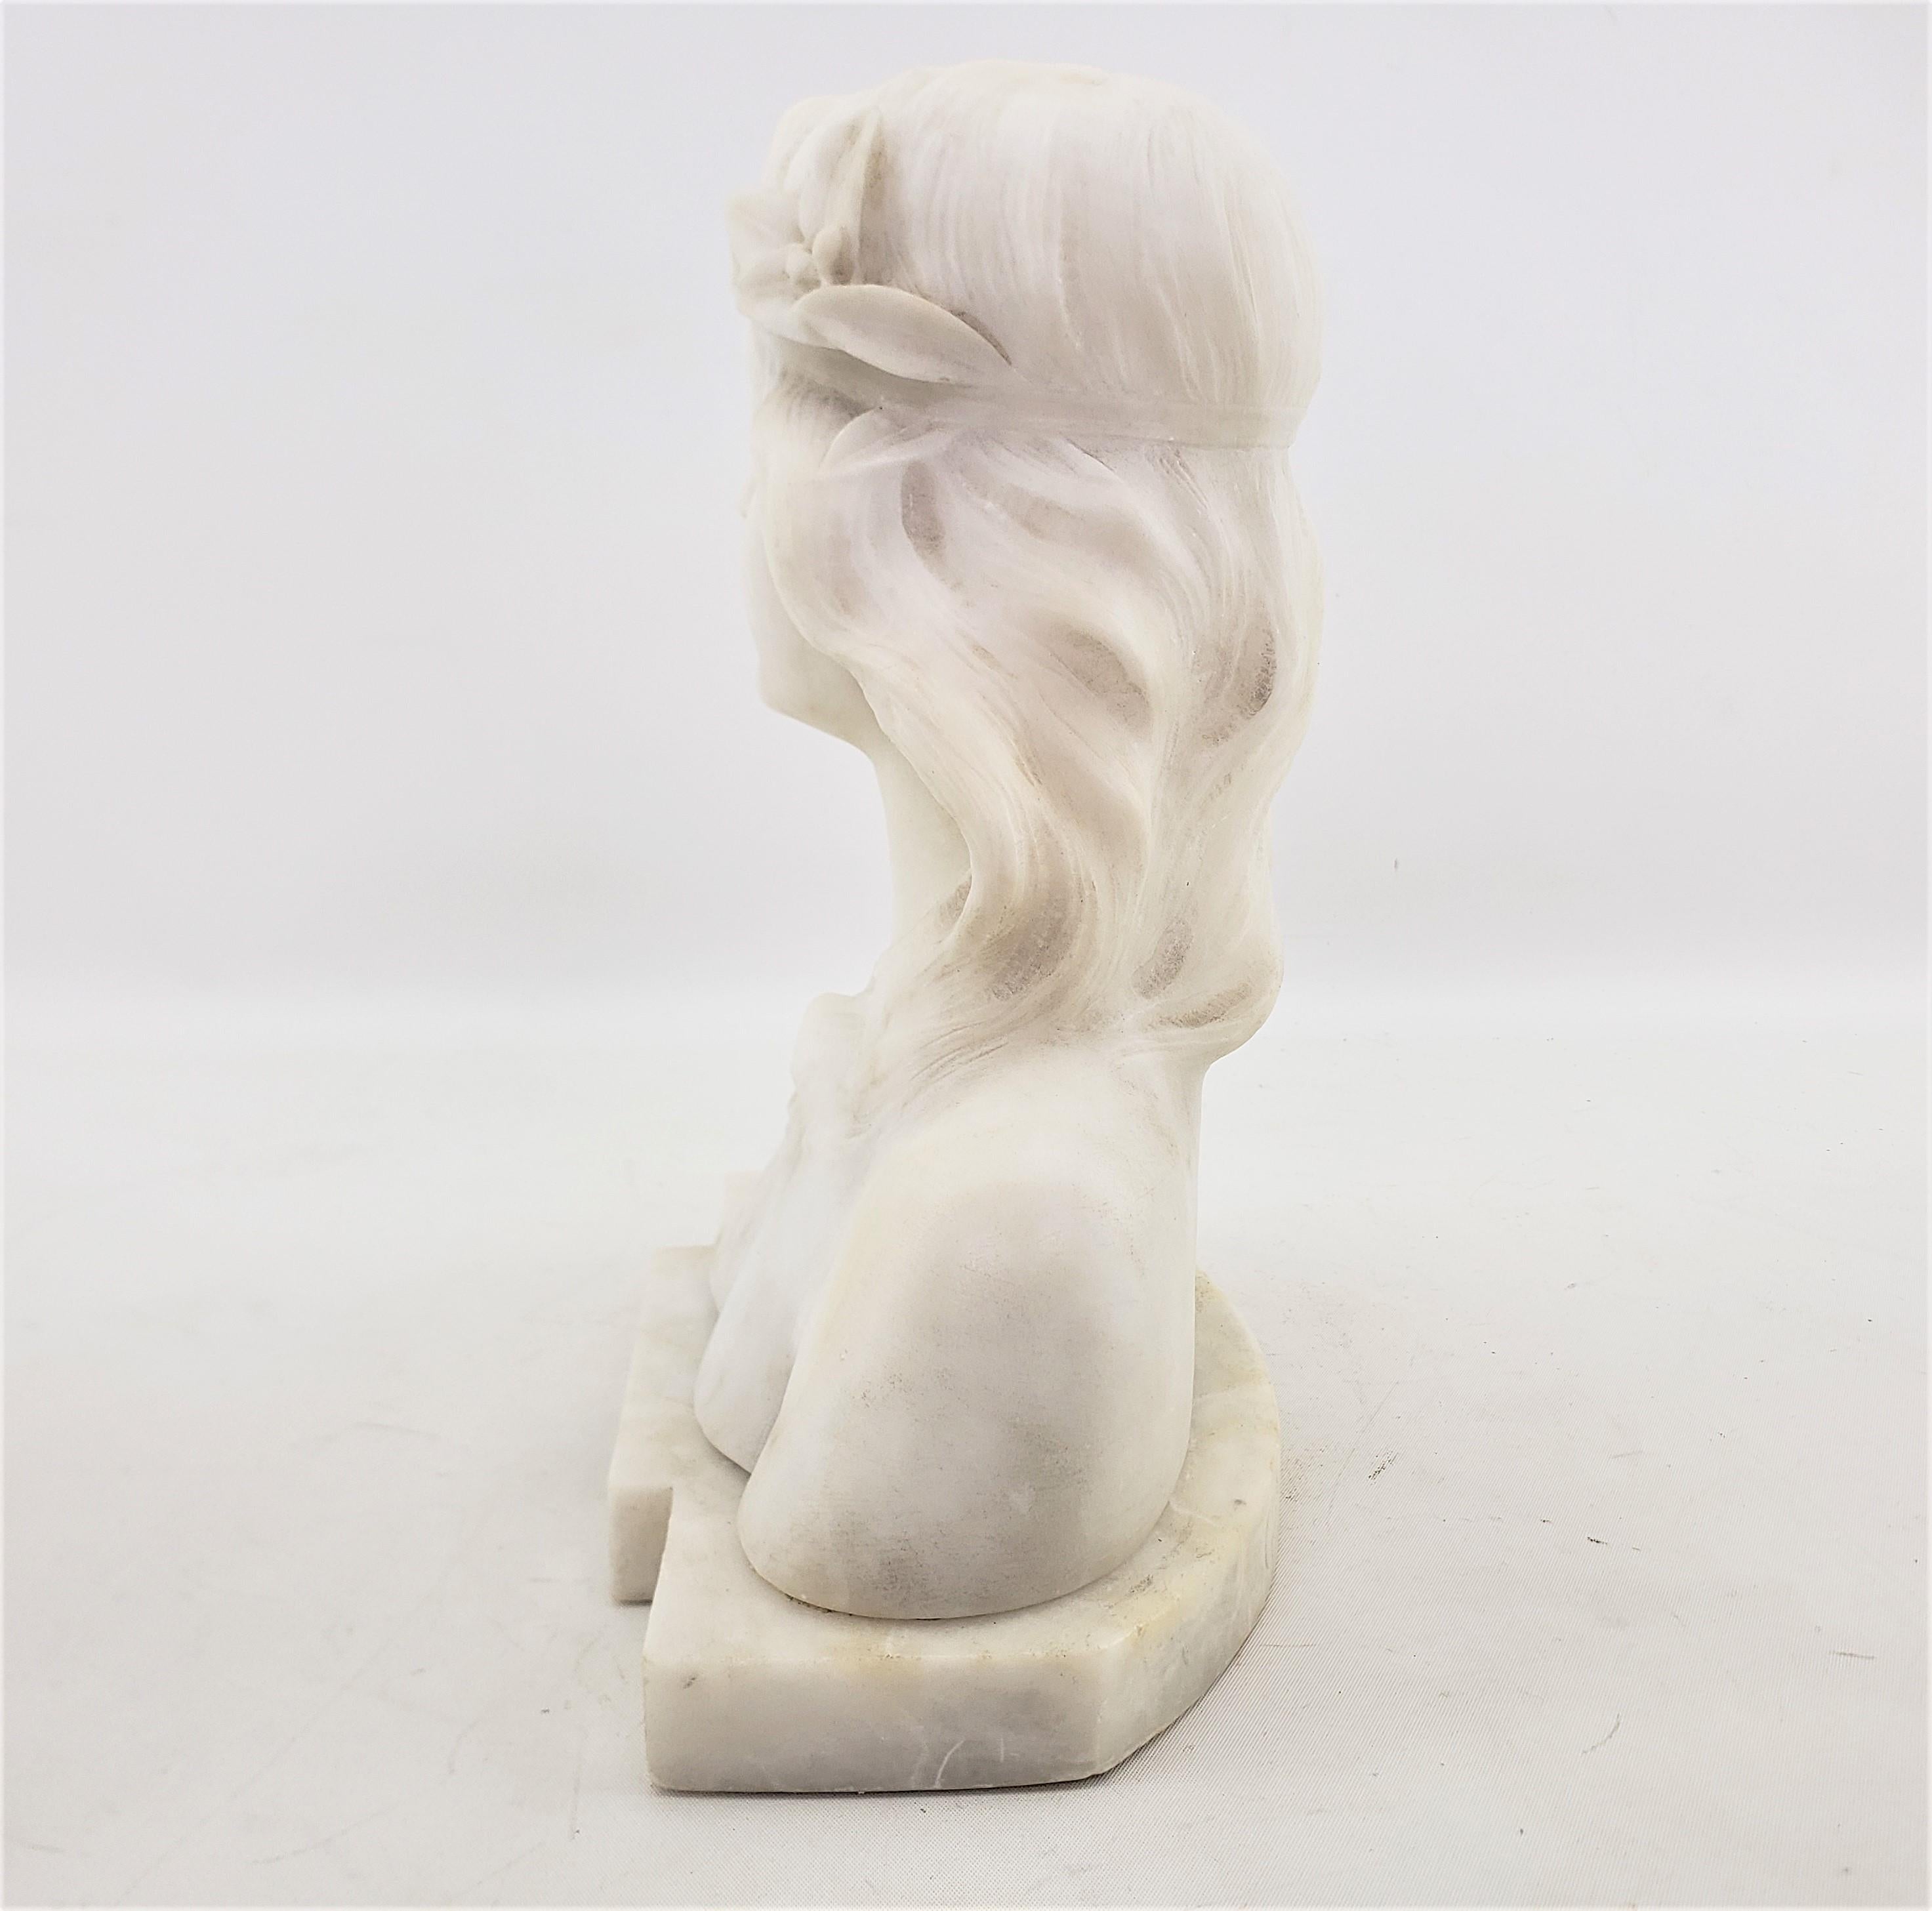 Hand-Crafted E. Zocchi Signed Antique White Marble Bust or Sculpture of a Young Female 